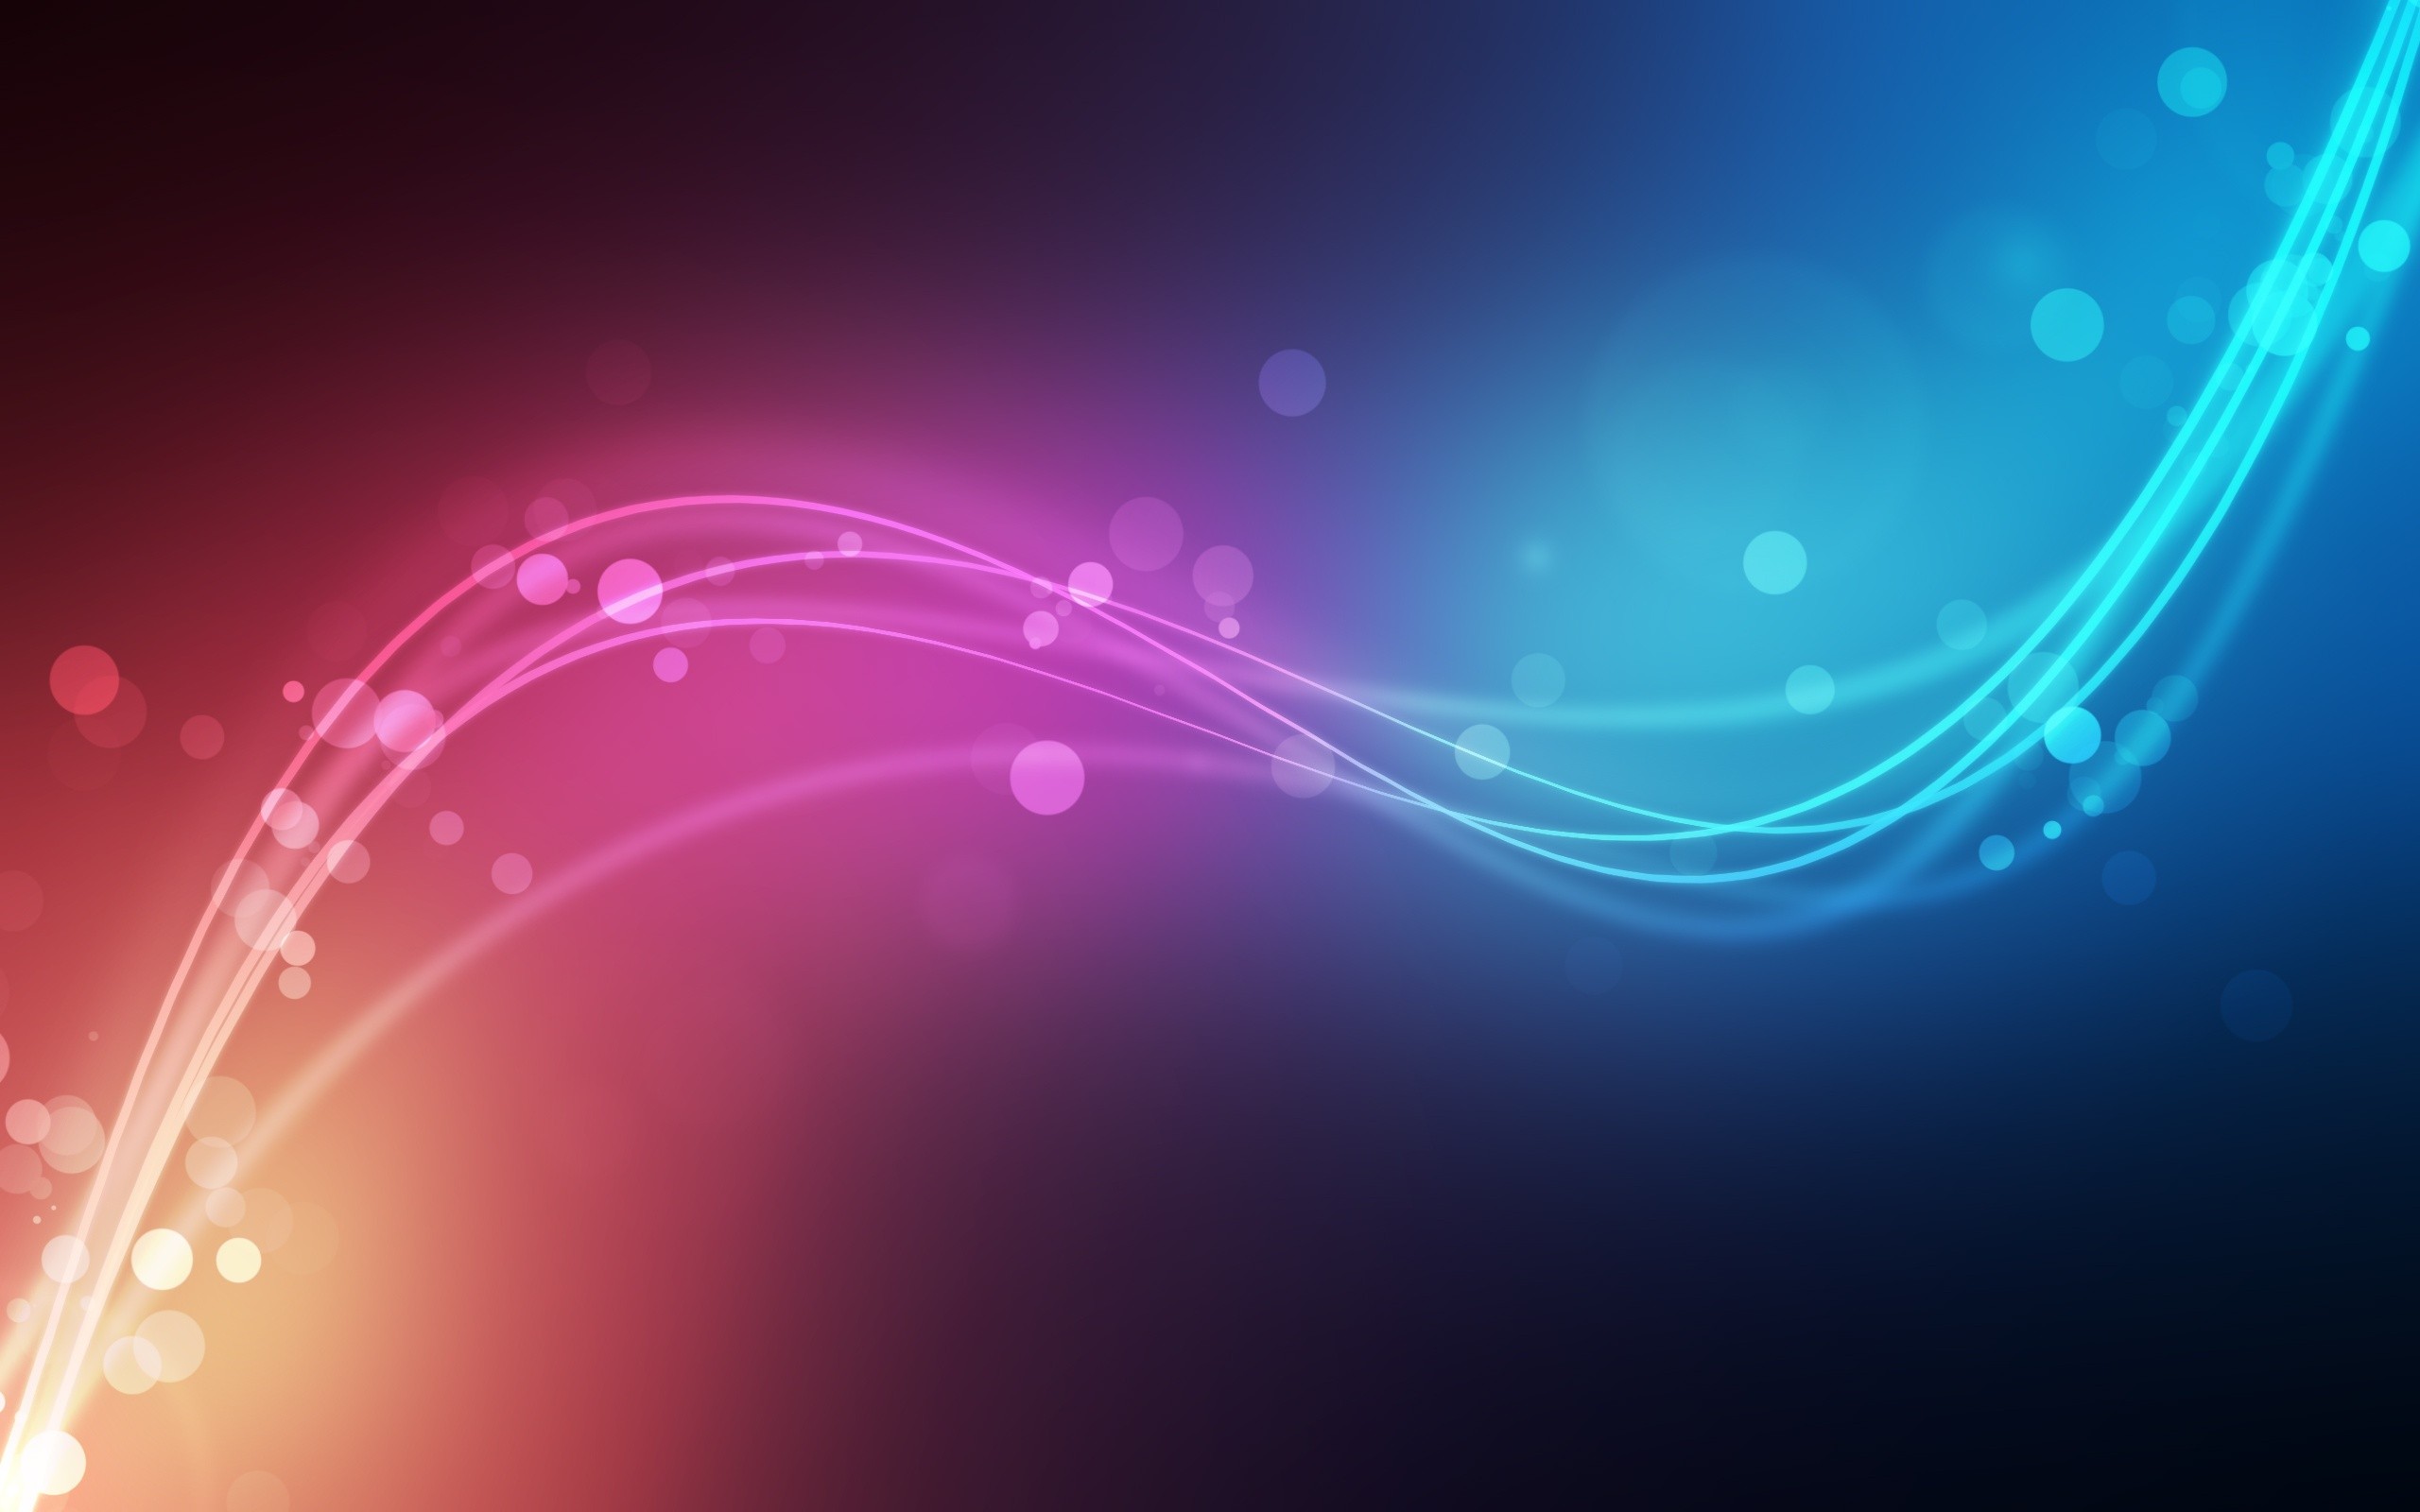 General 2560x1600 abstract simple background colorful waveforms lines lights digital art digital glowing